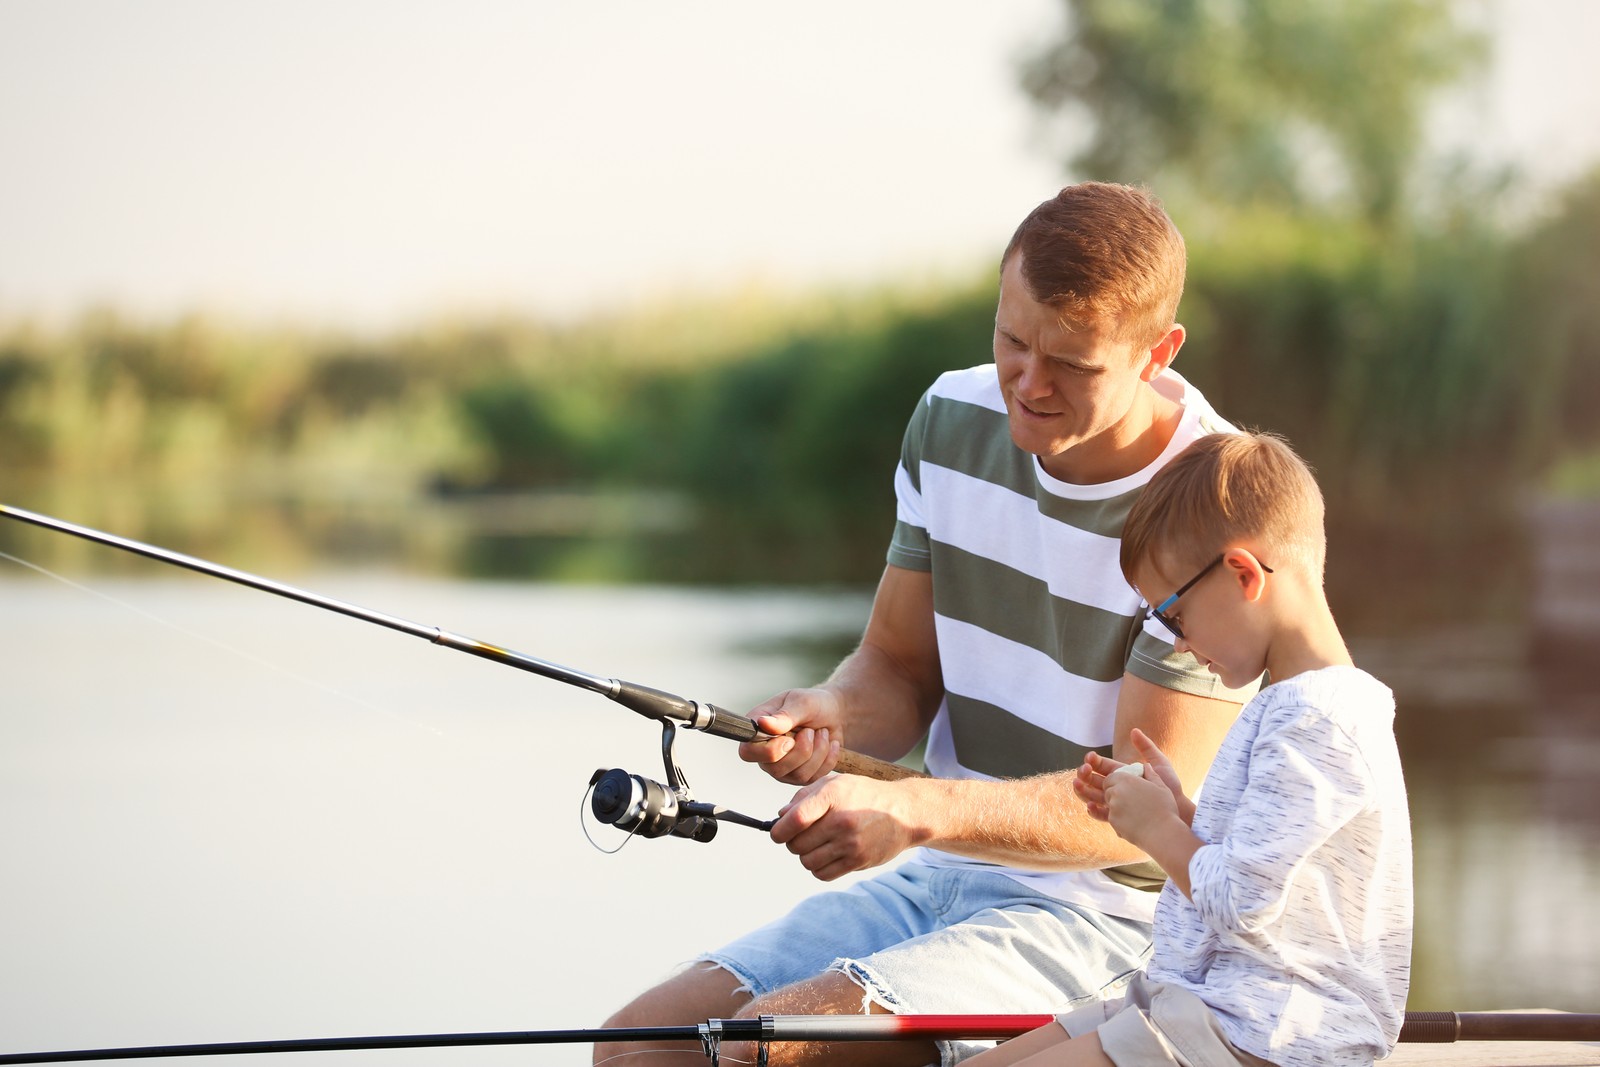 Photo of dad and son fishing together on sunny day